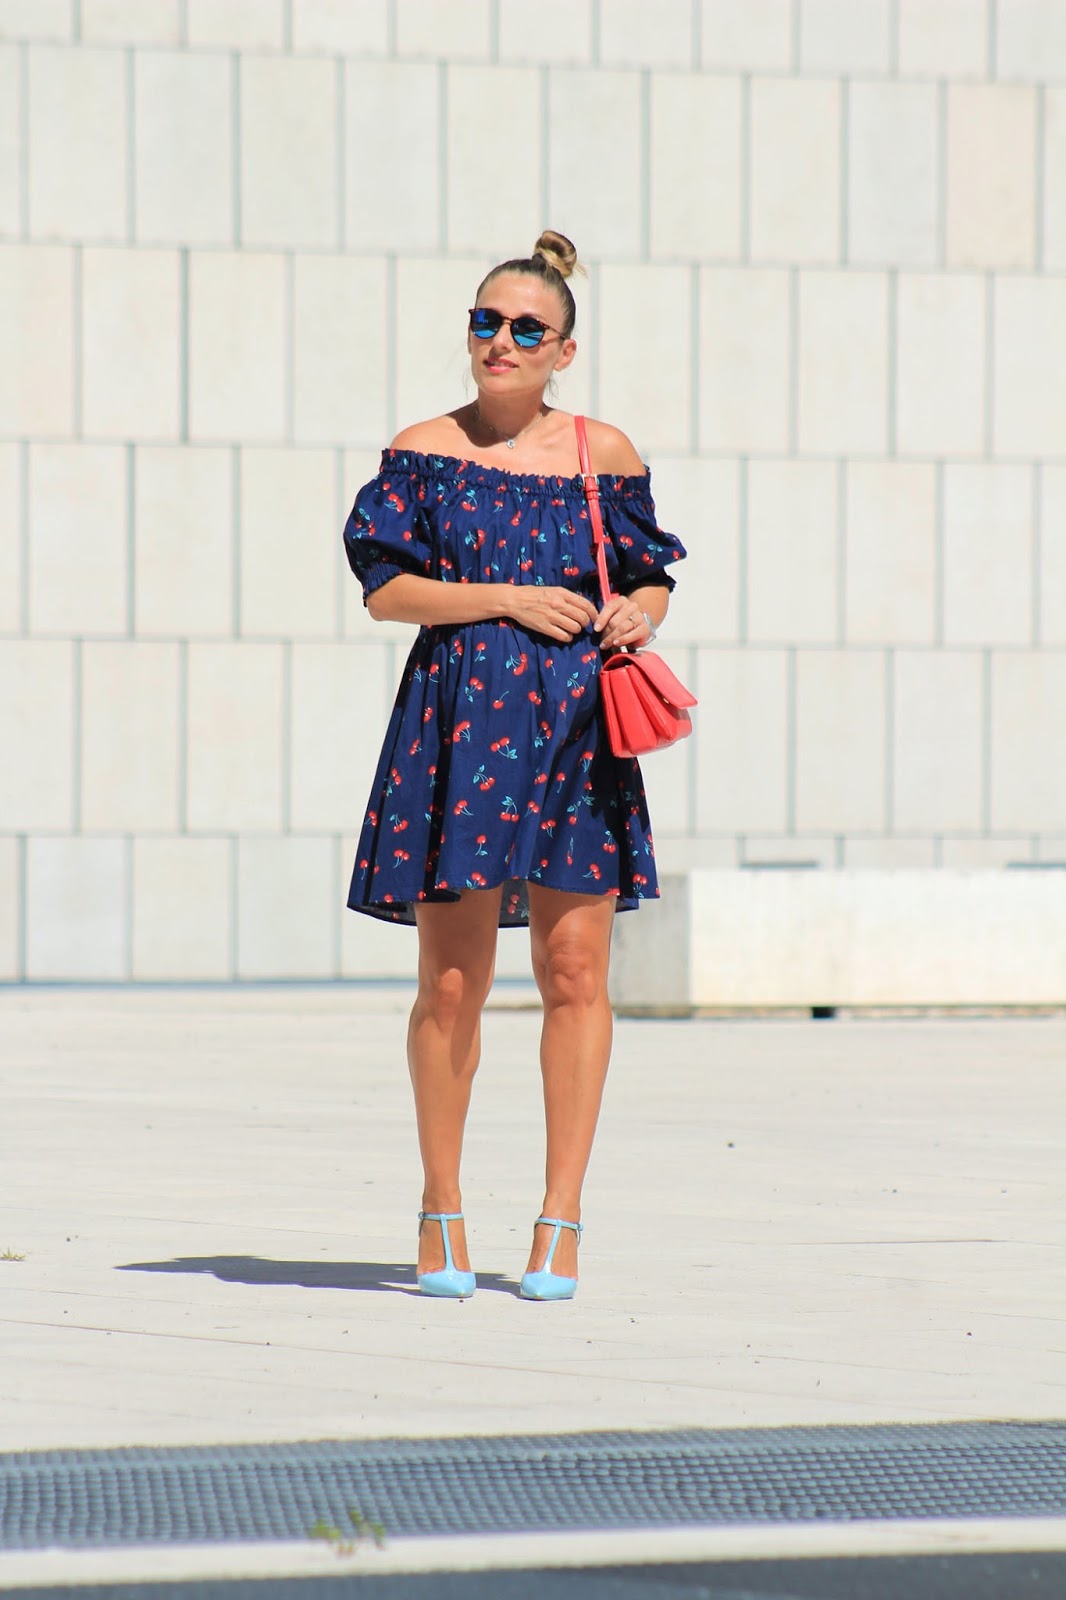 How to wear a cherry dress - Eniwhere Fashion - Rosegal